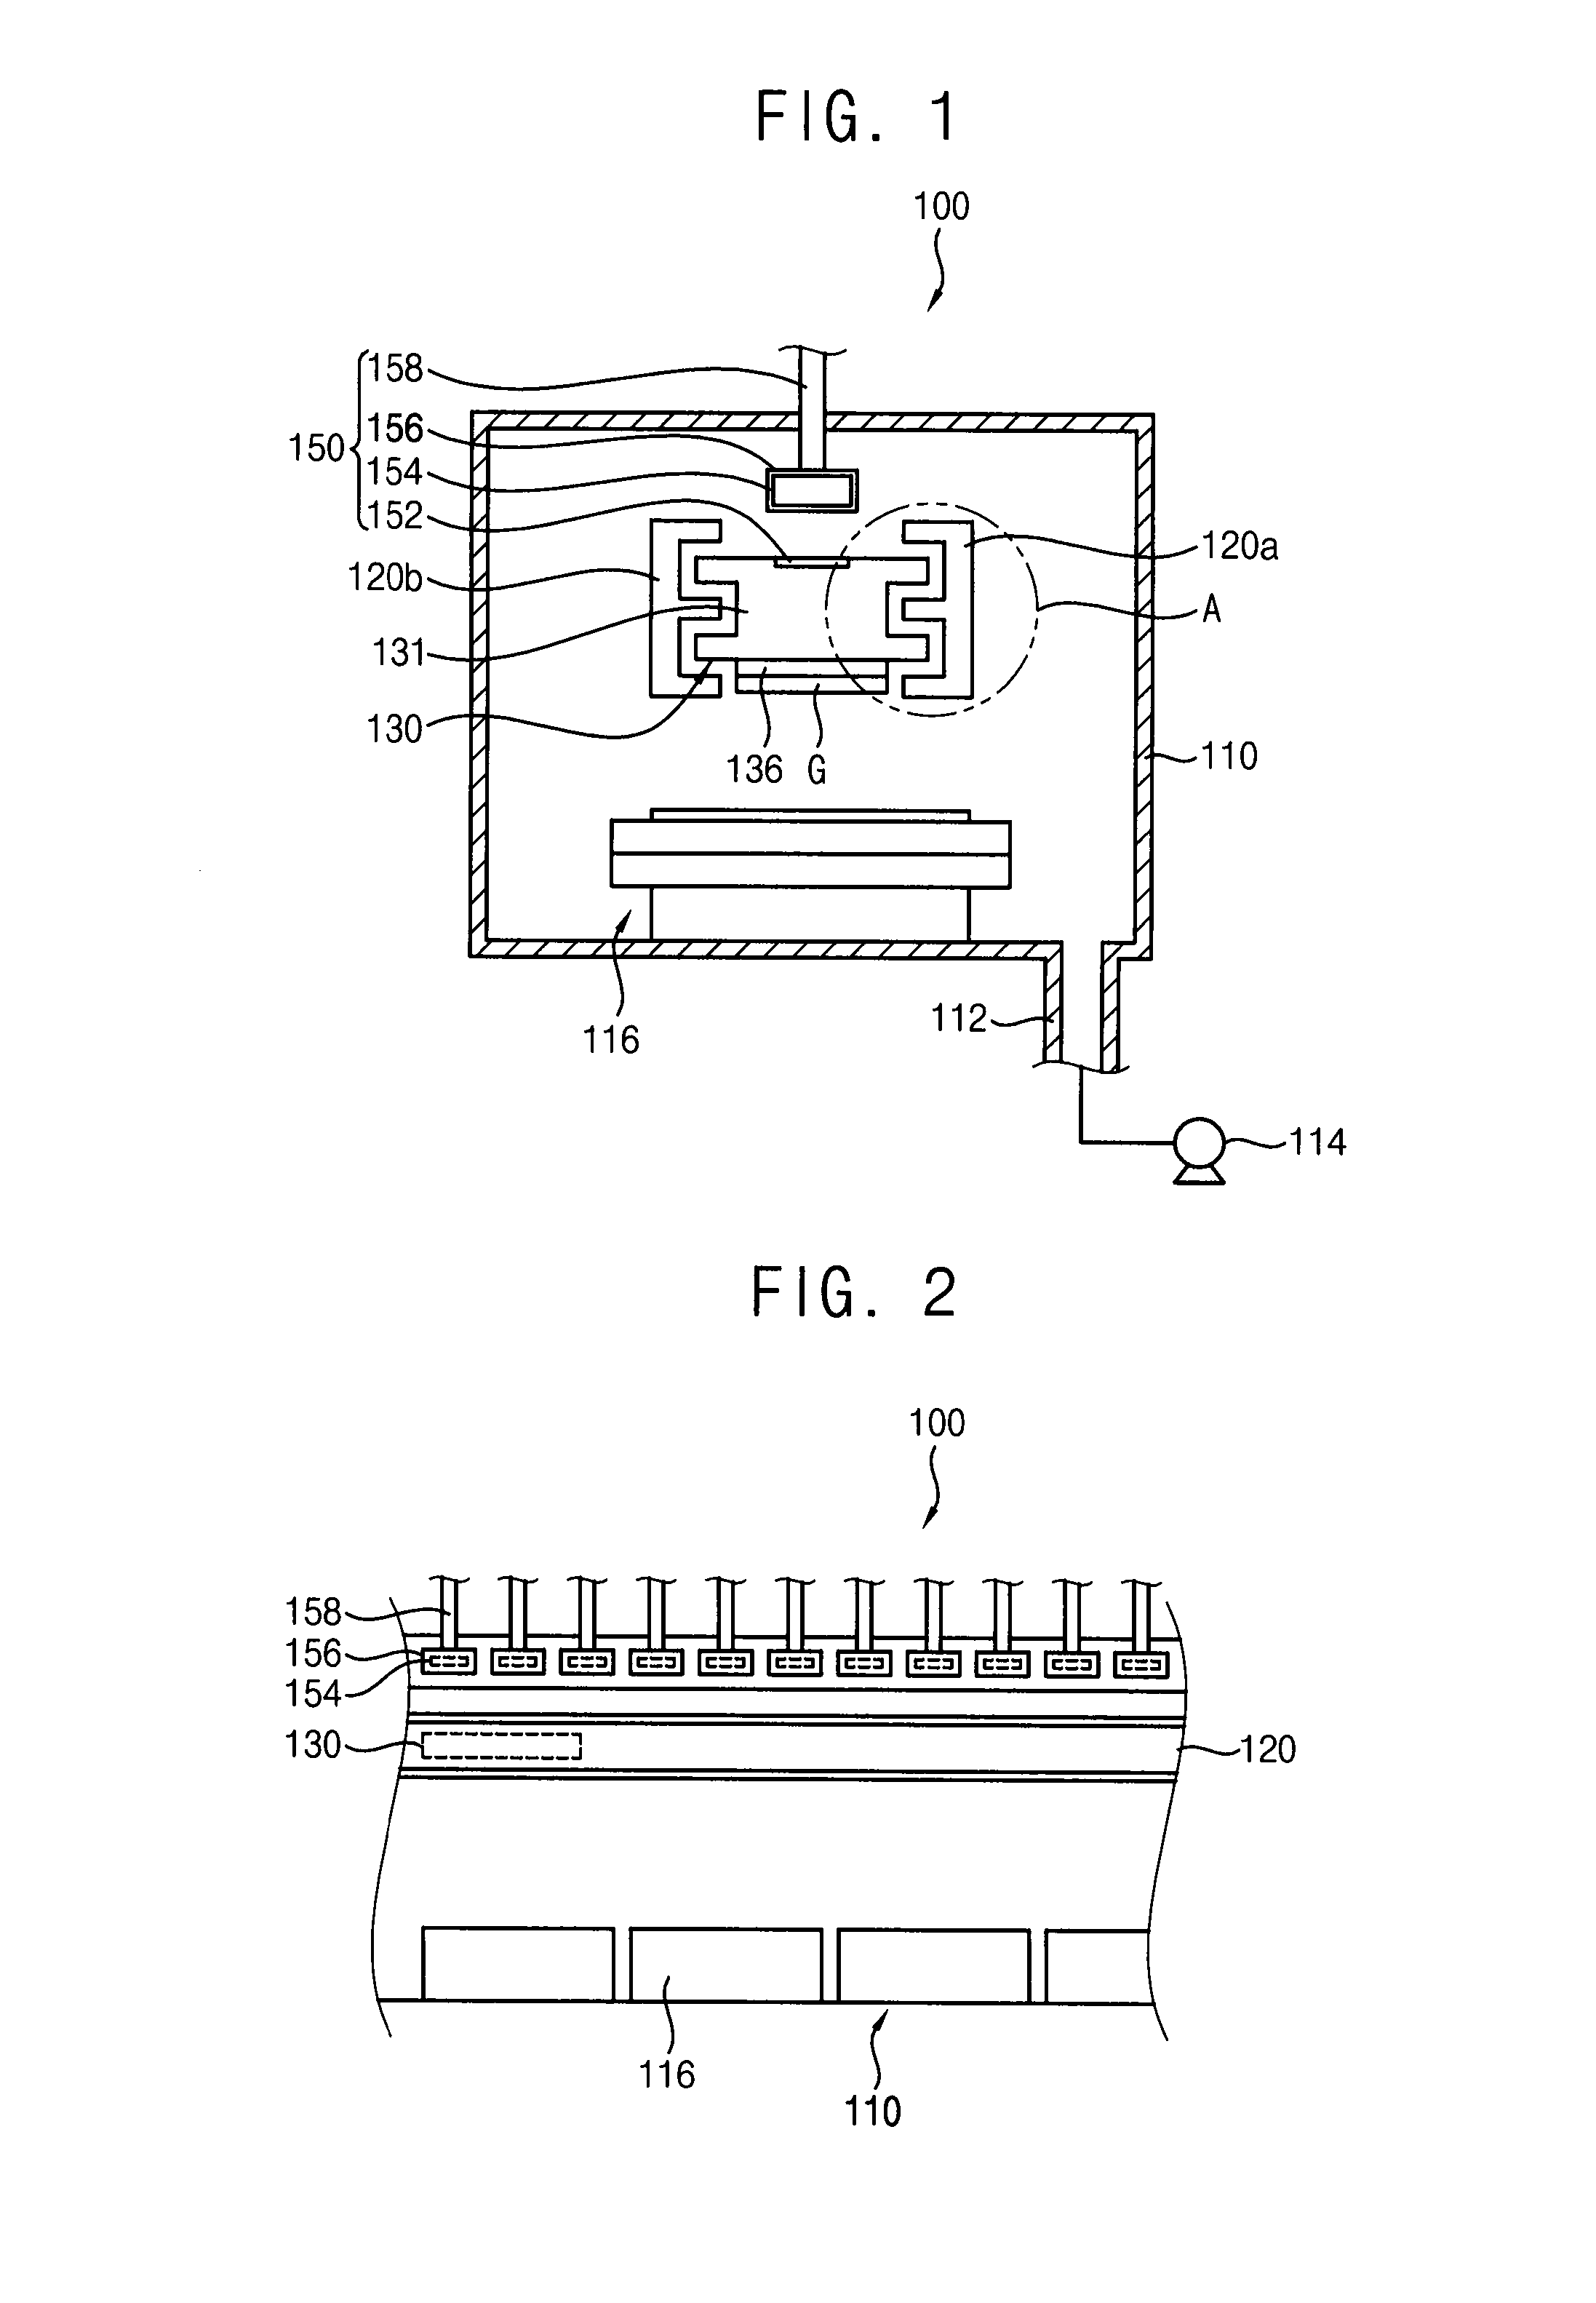 Substrate transfer apparatus and thin film deposition apparatus having the same